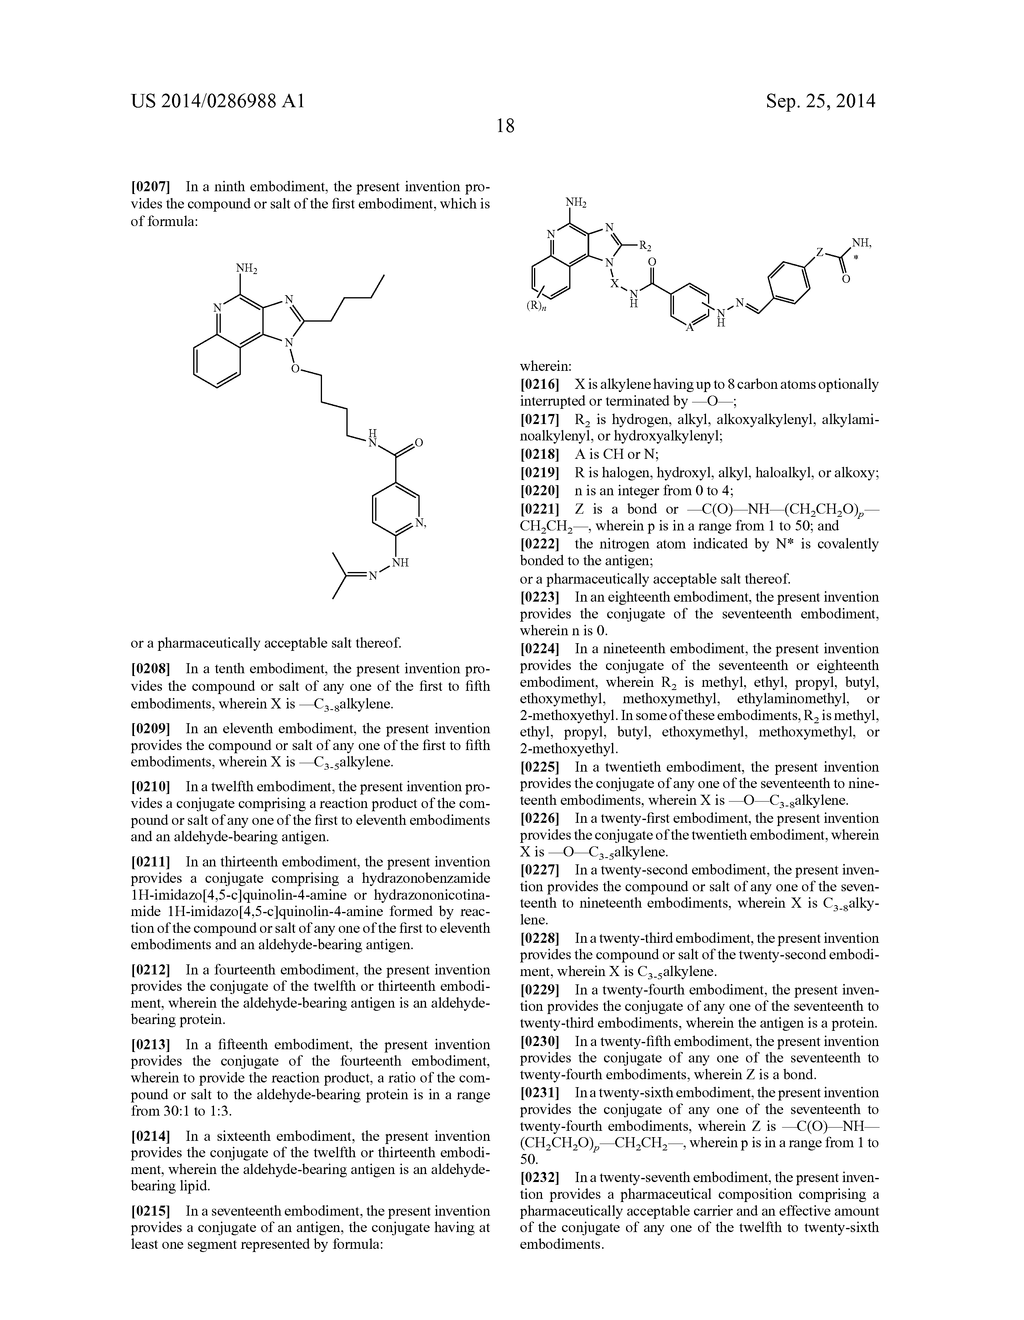 HYDRAZINO 1H-IMIDAZOQUINOLIN-4-AMINES AND CONJUGATES MADE THEREFROM - diagram, schematic, and image 19